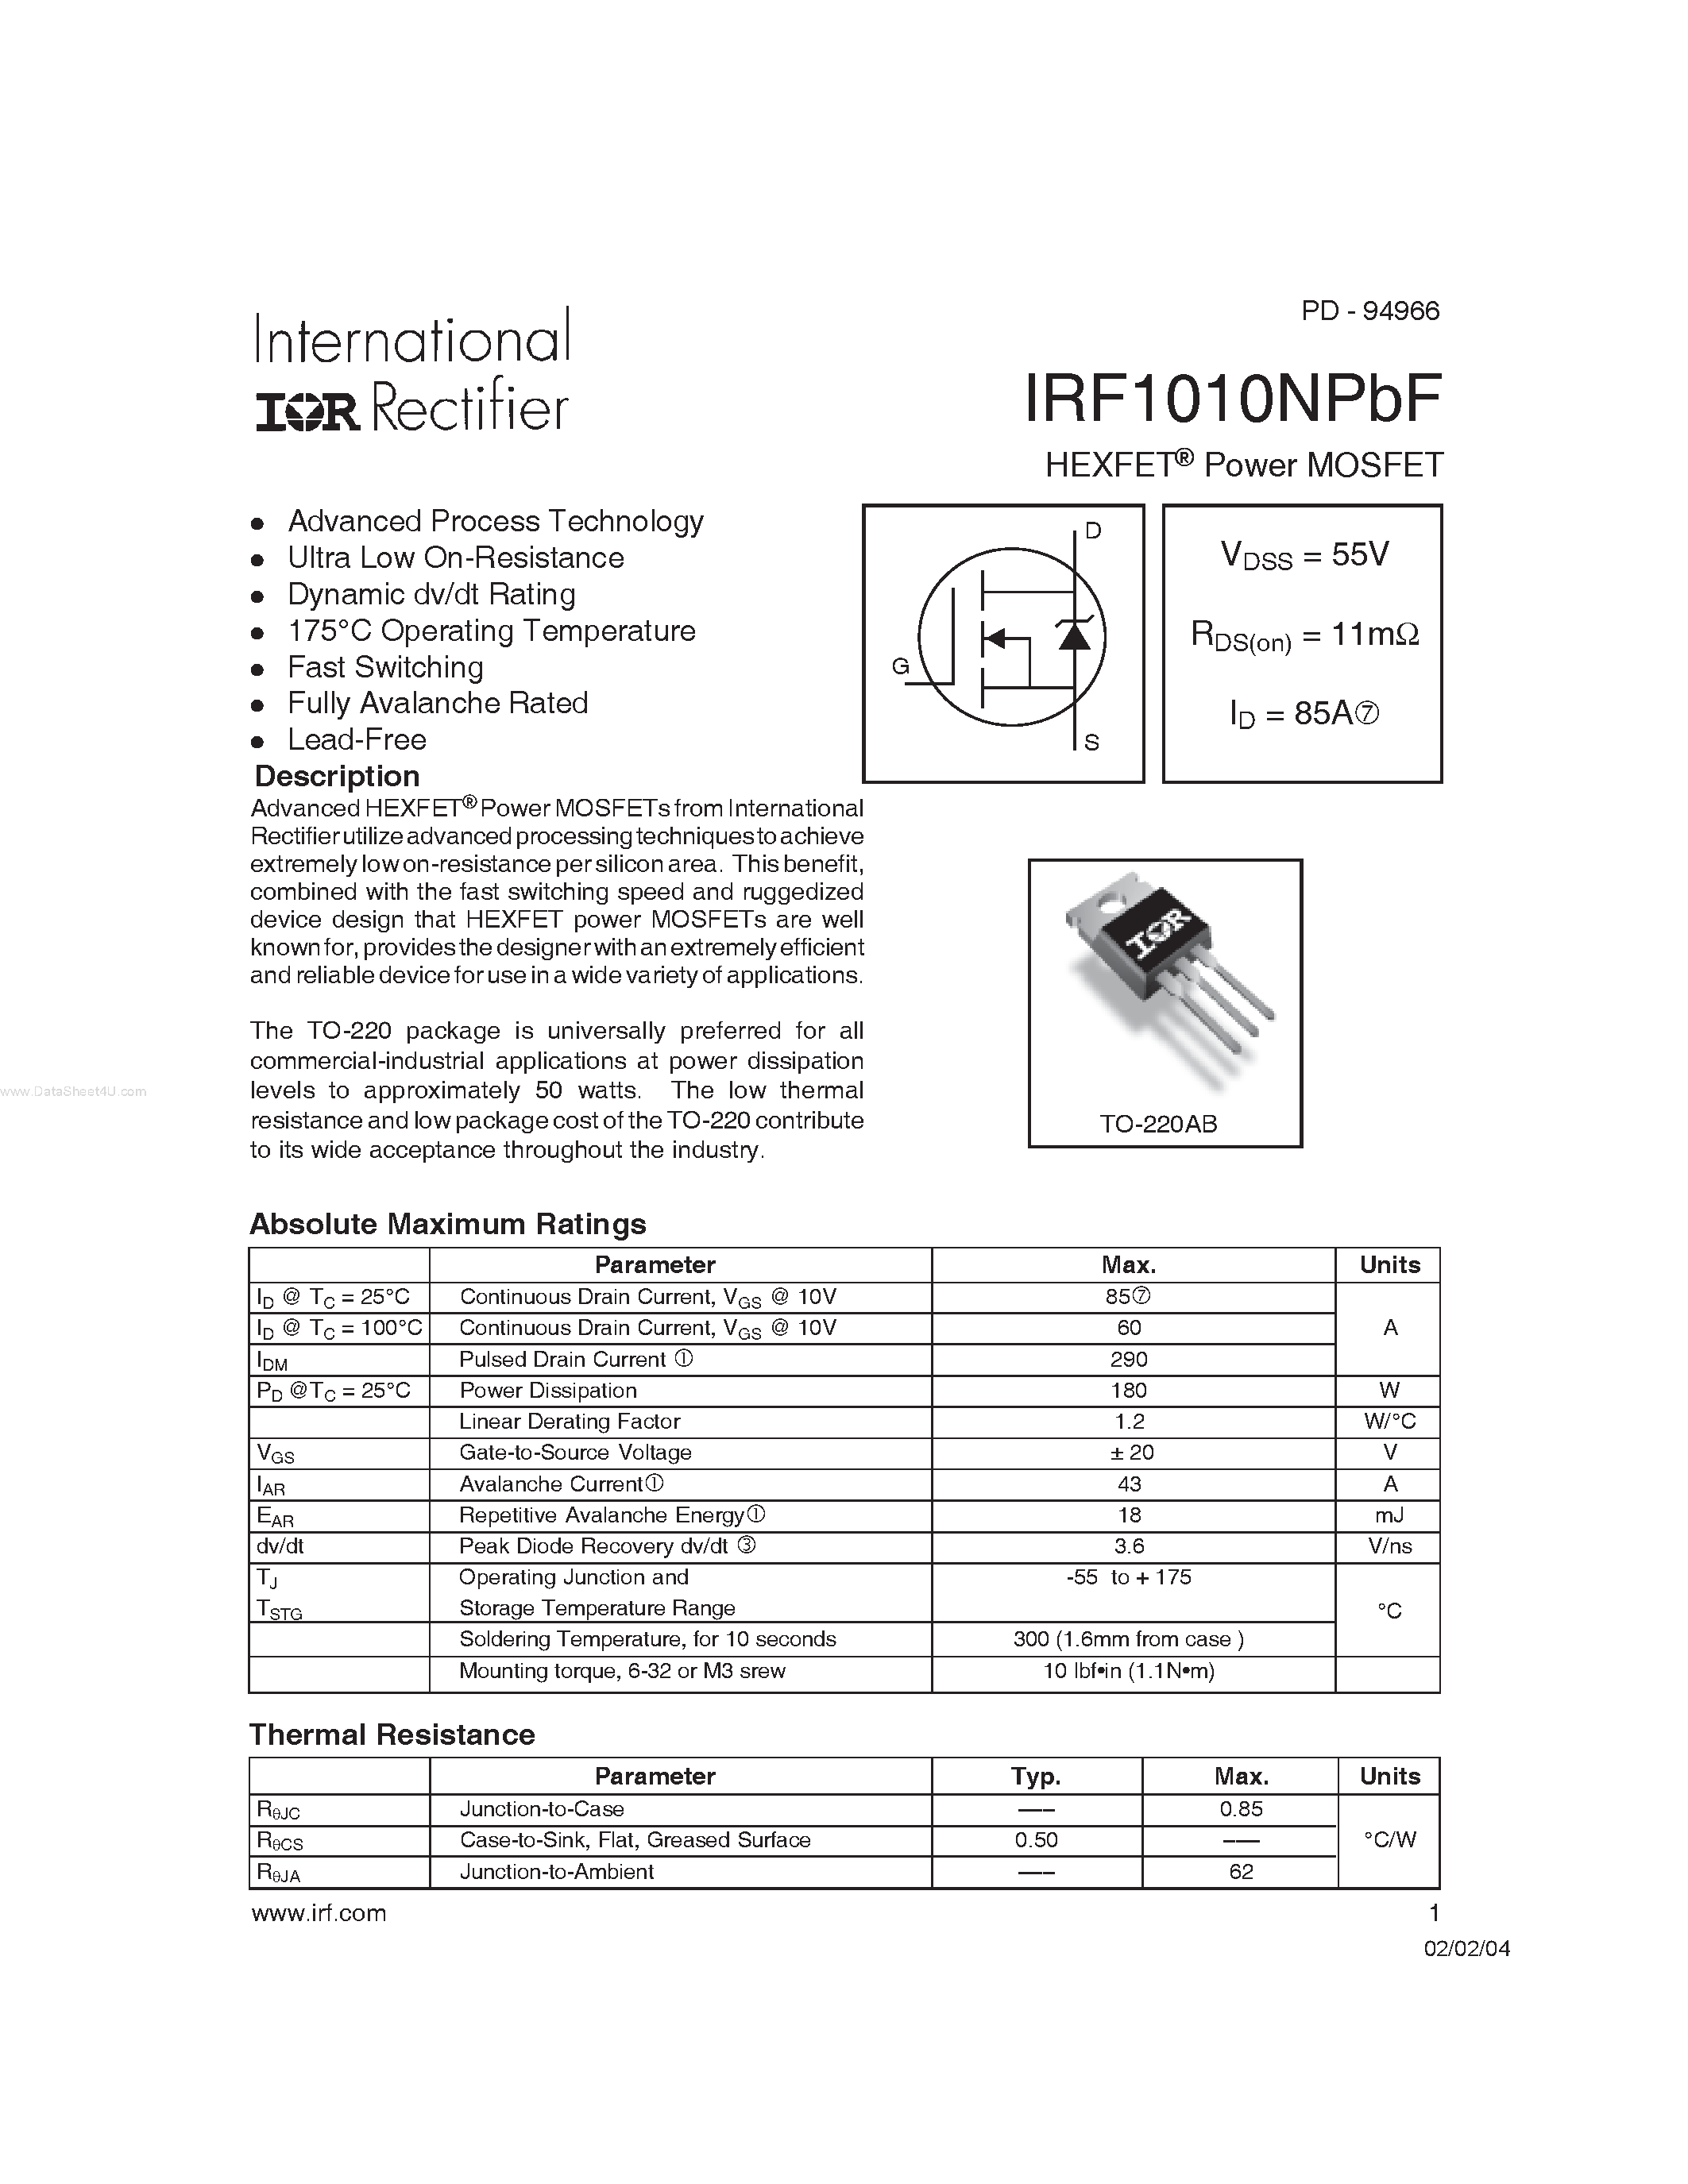 Даташит IRF1010NPBF - HEXFET Power MOSFET страница 1